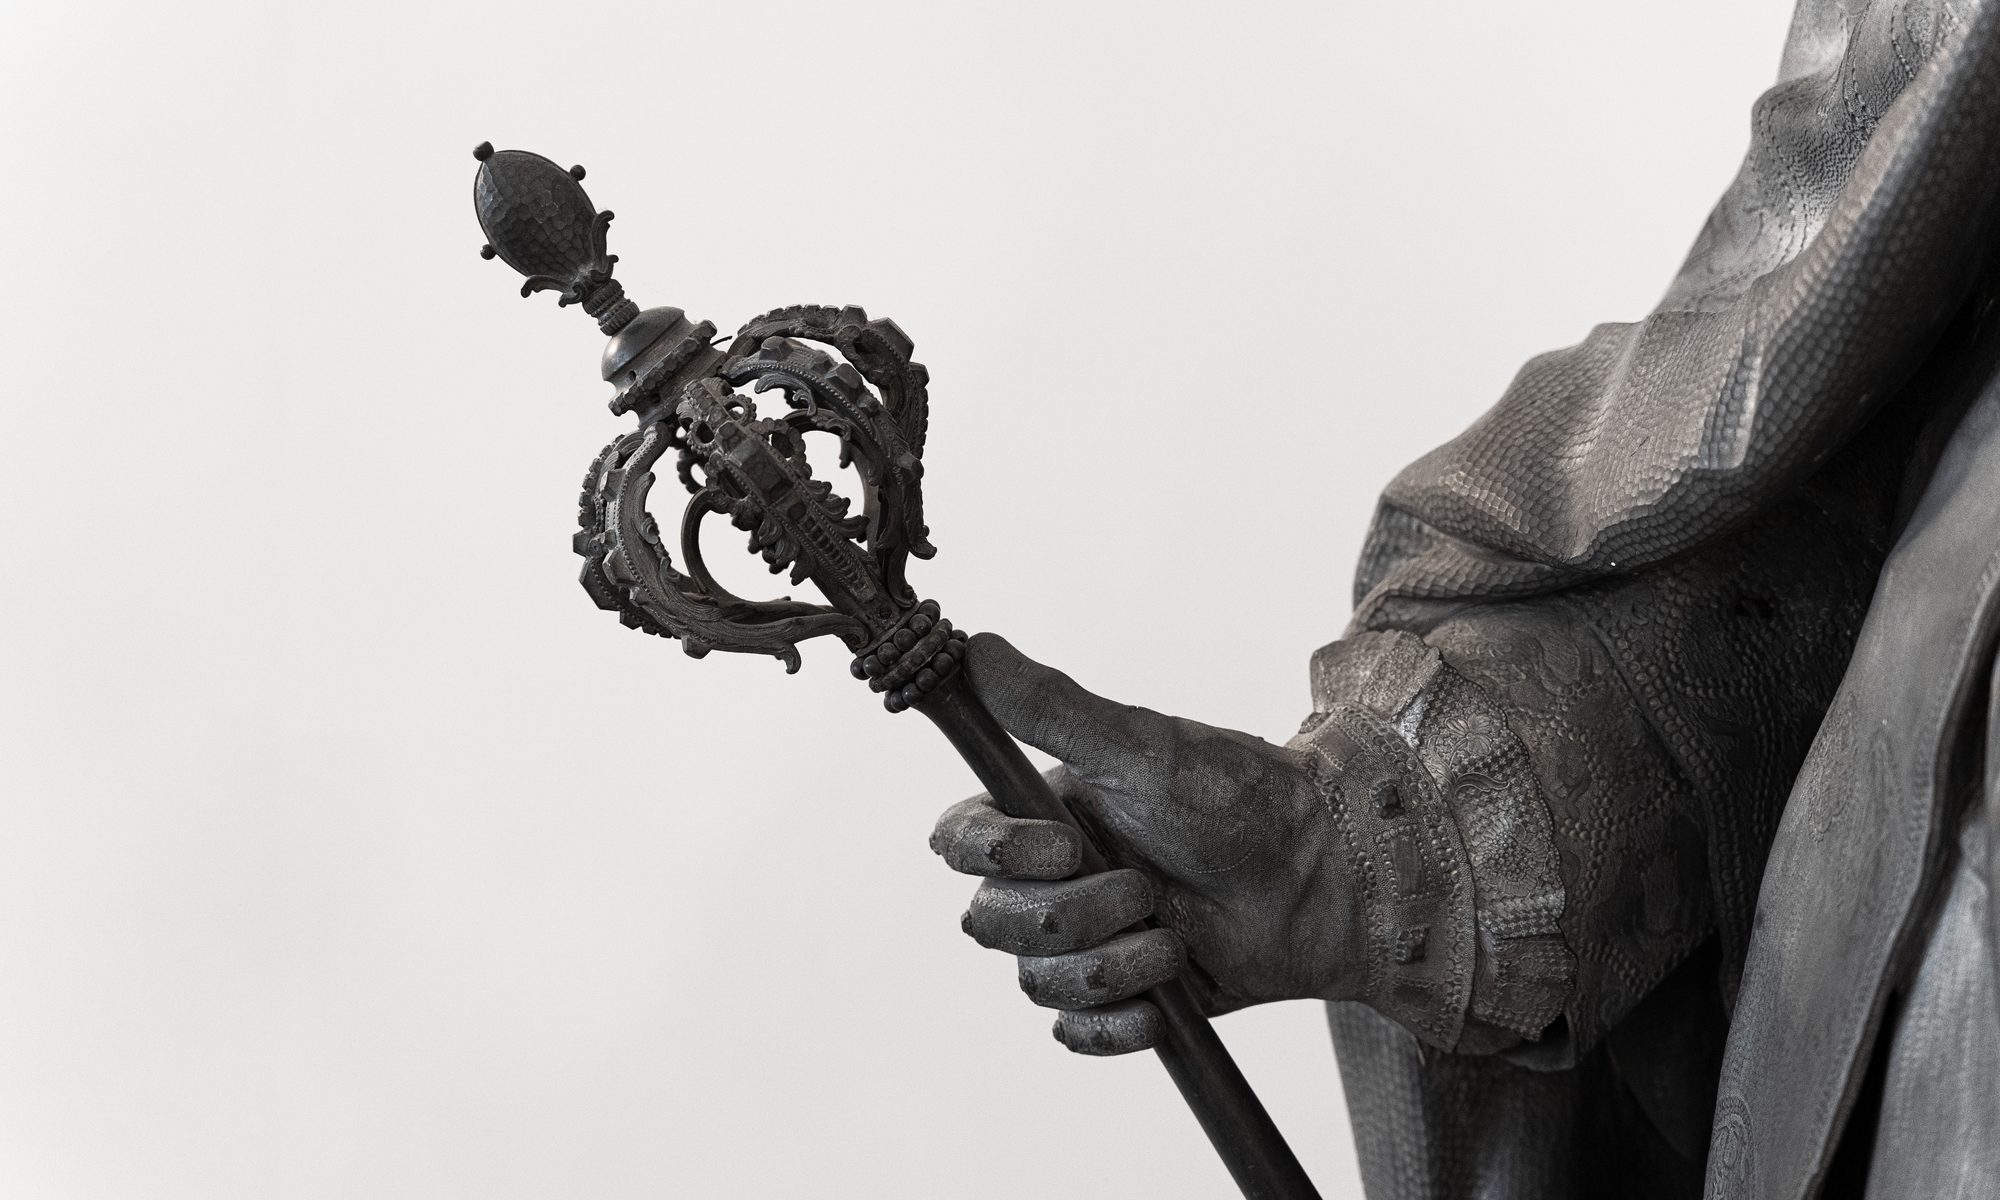 photograph of statue holding scepter